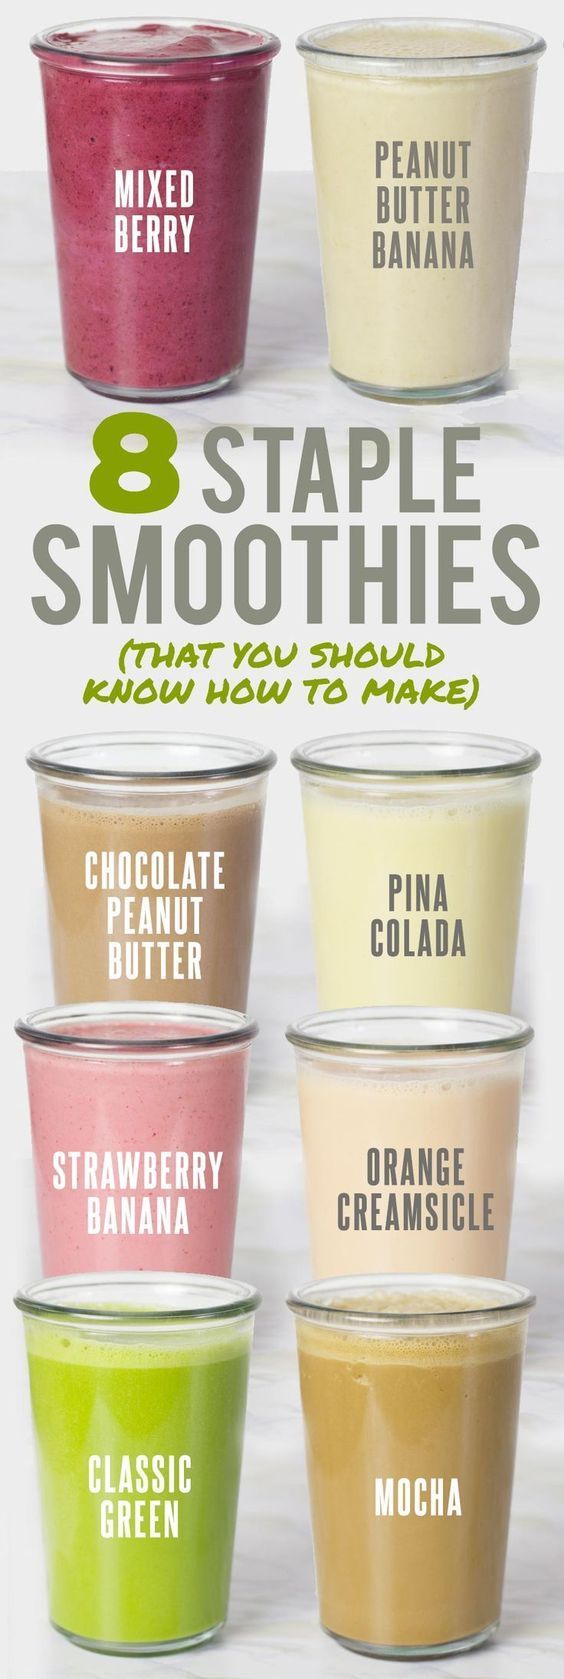 8 Healthy Staple Smoothie Recipes That You Should Know How to Make! #fitness_recipes_how_to_make